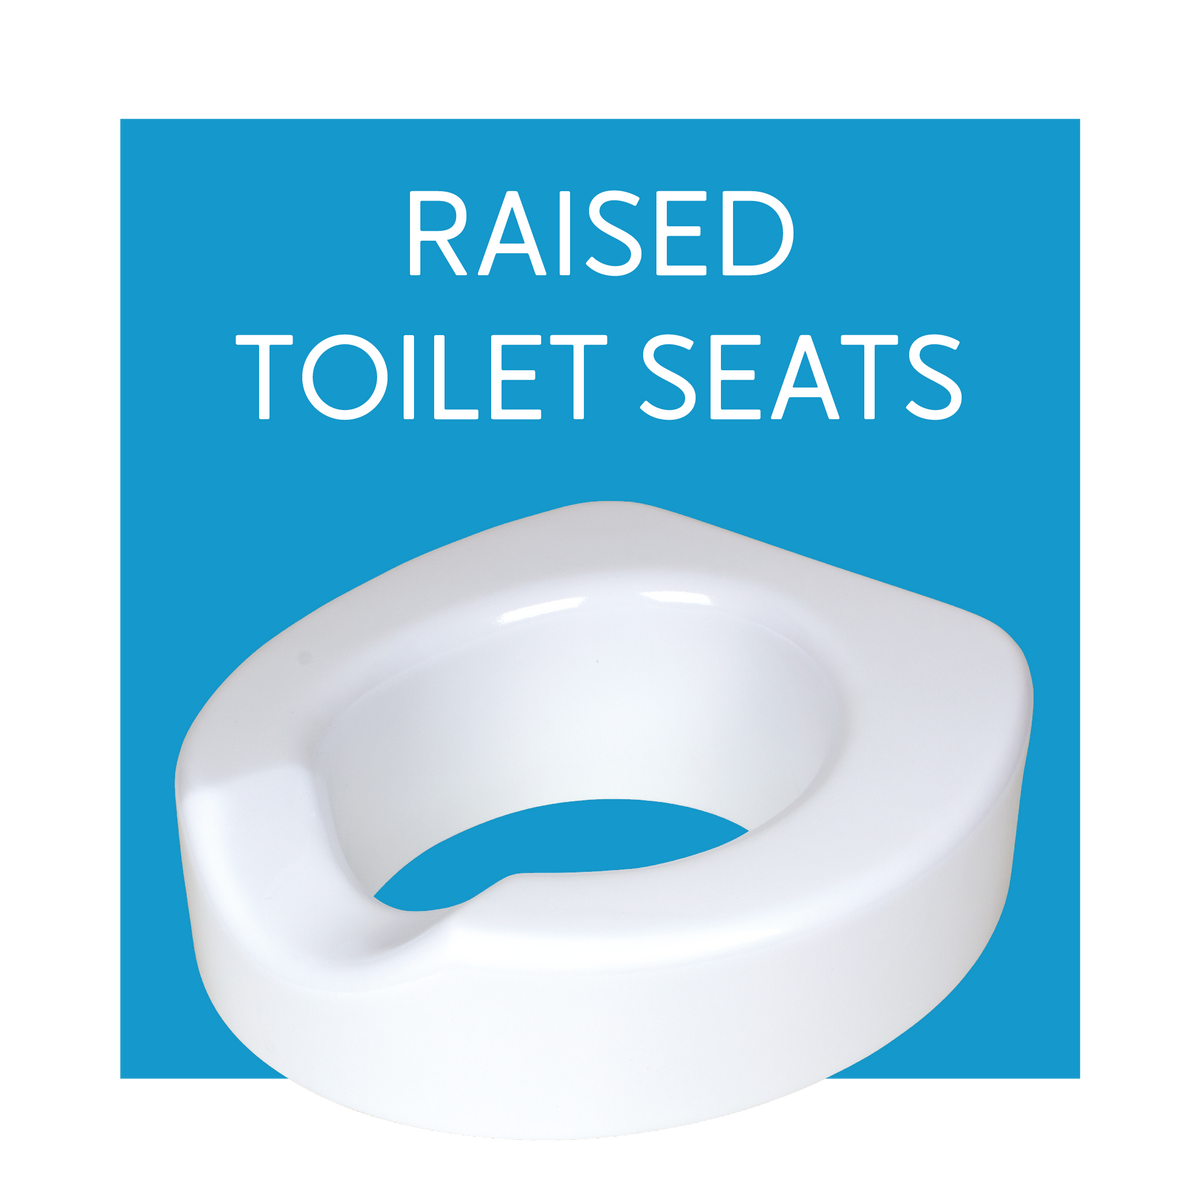 A raised toilet seat on a blue background